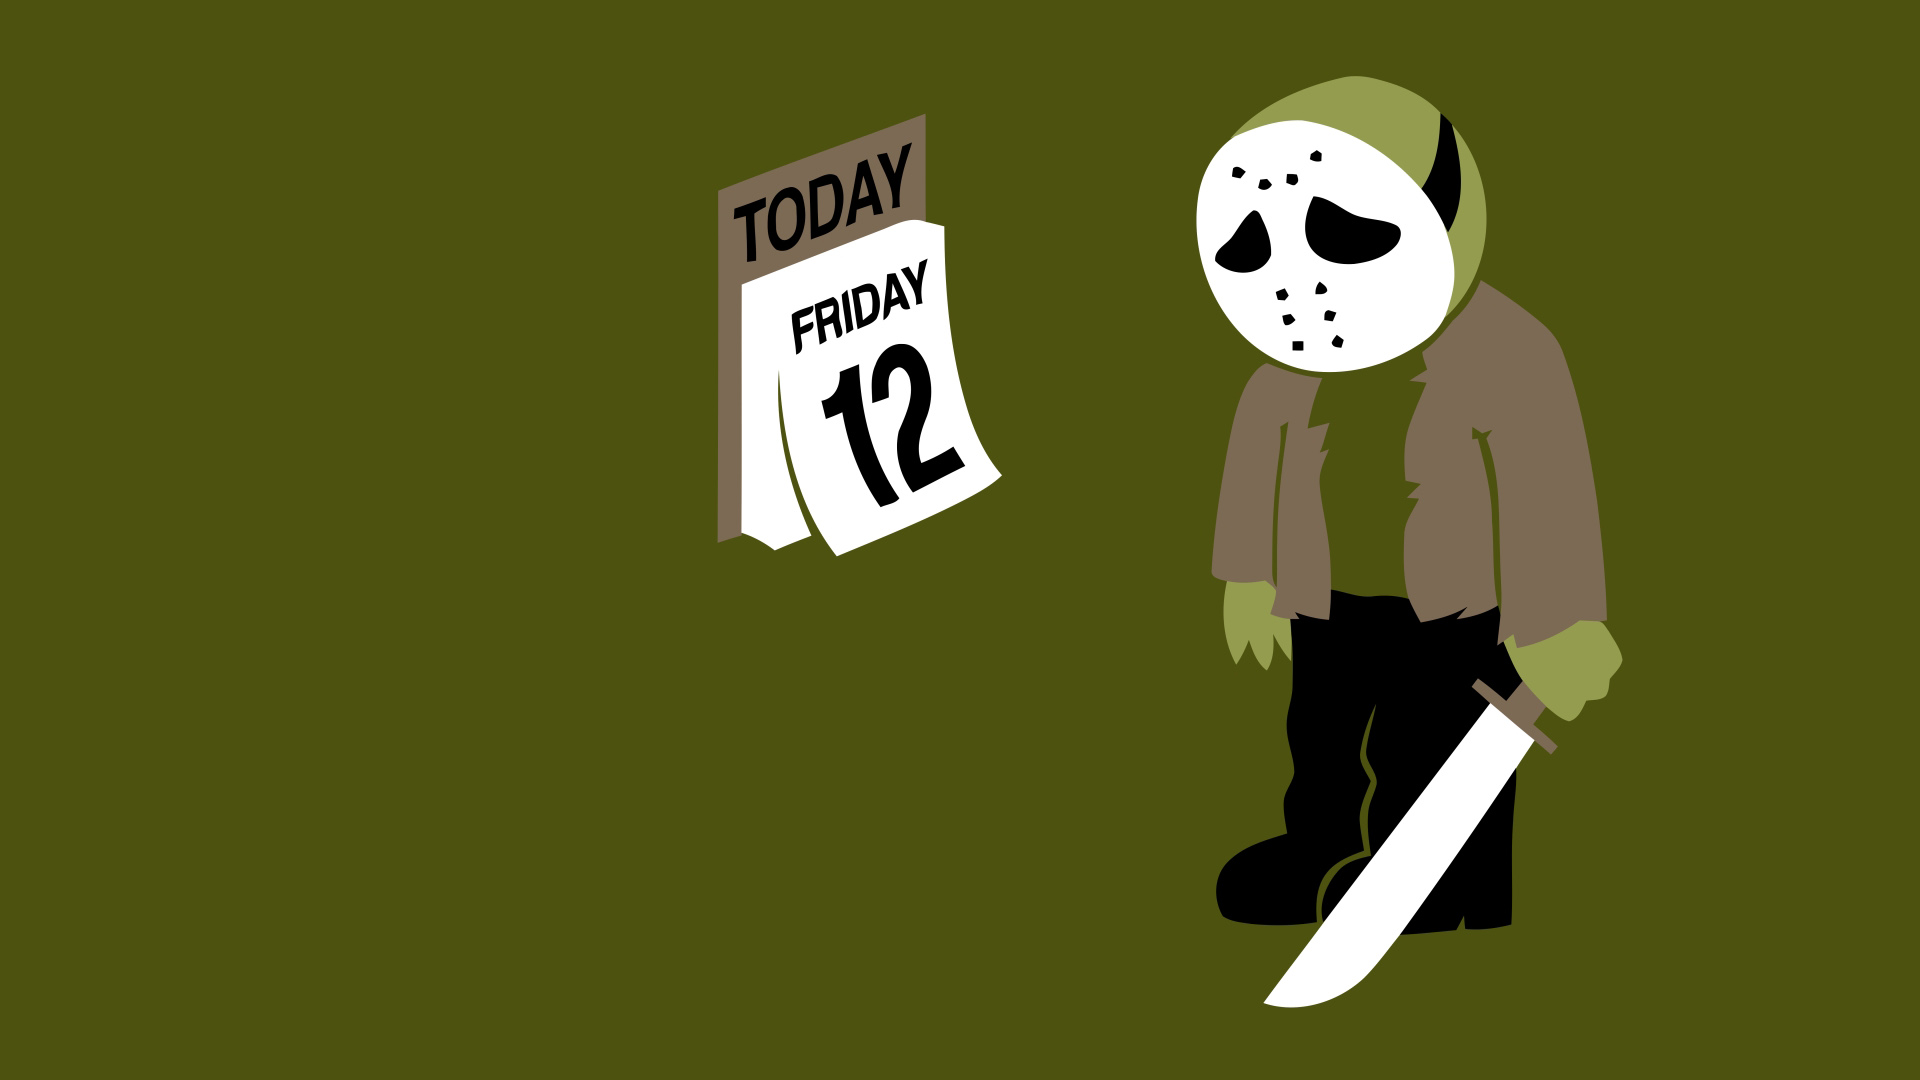 Jason Voorhees wearing a creepy mask, representing the horror movie Friday the 13th.